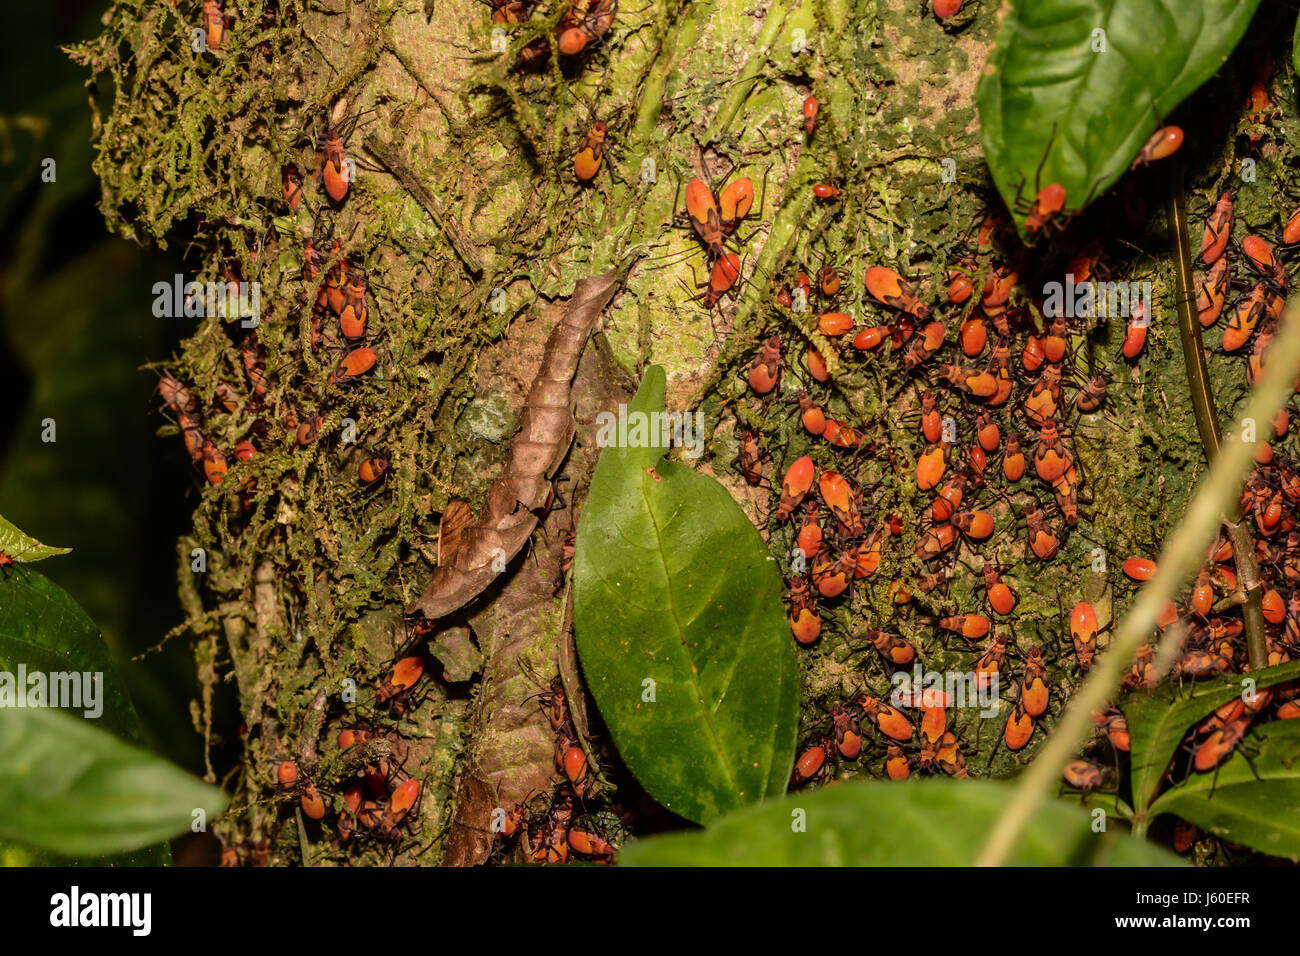 Cotton Stainer bugs feeding off a tree in the Rainforest in Costa Rica Stock Photo